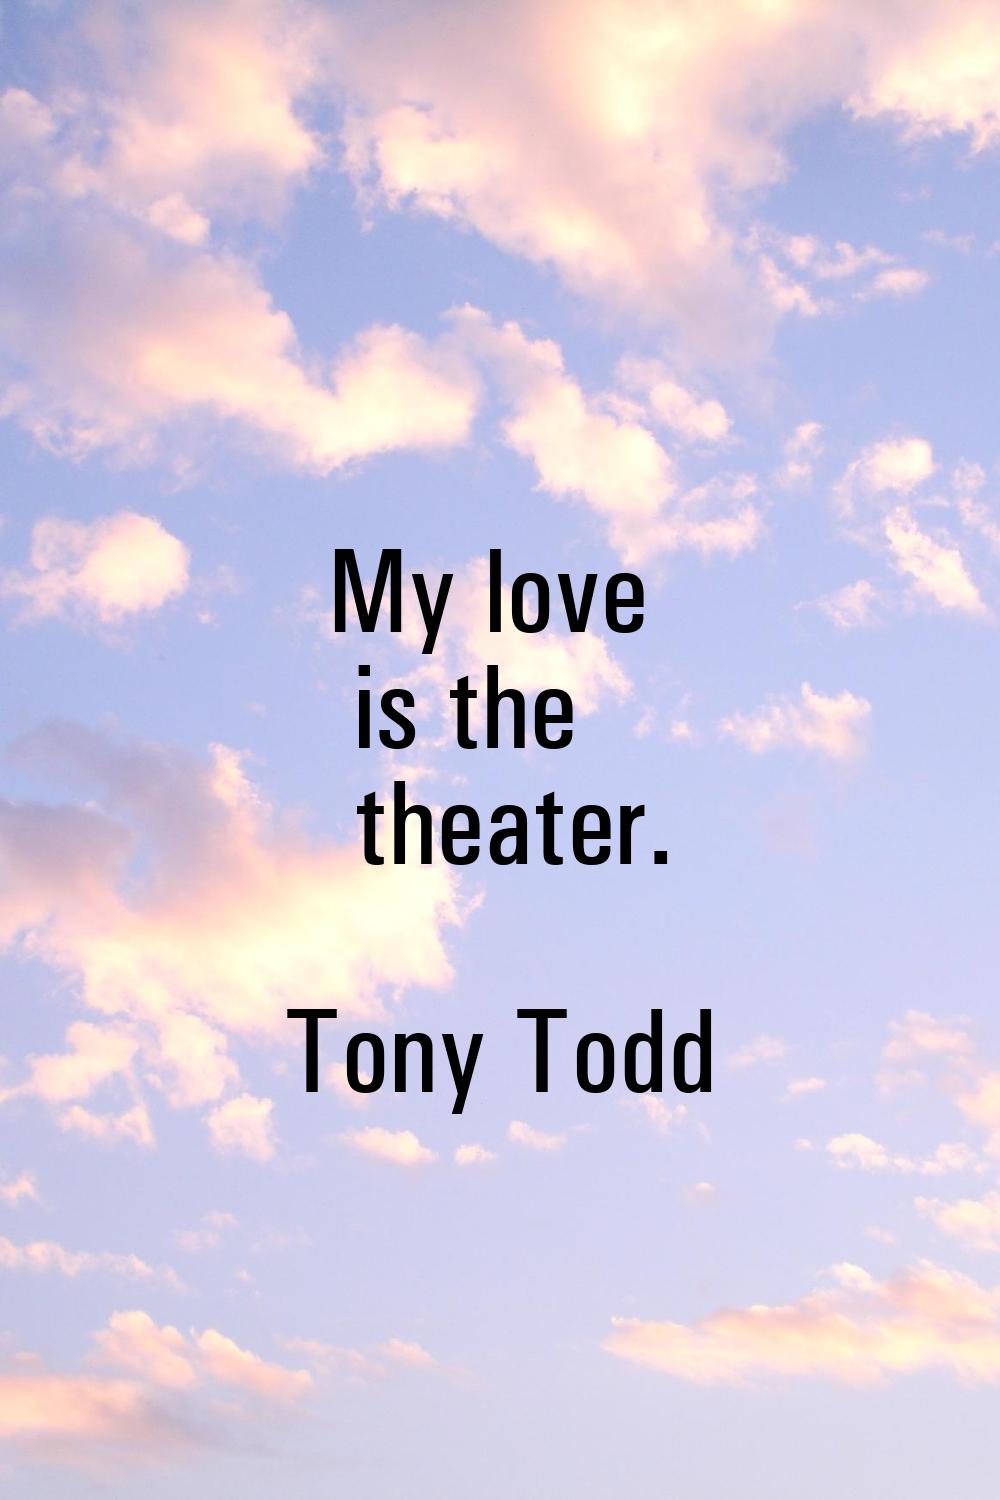 My love is the theater.